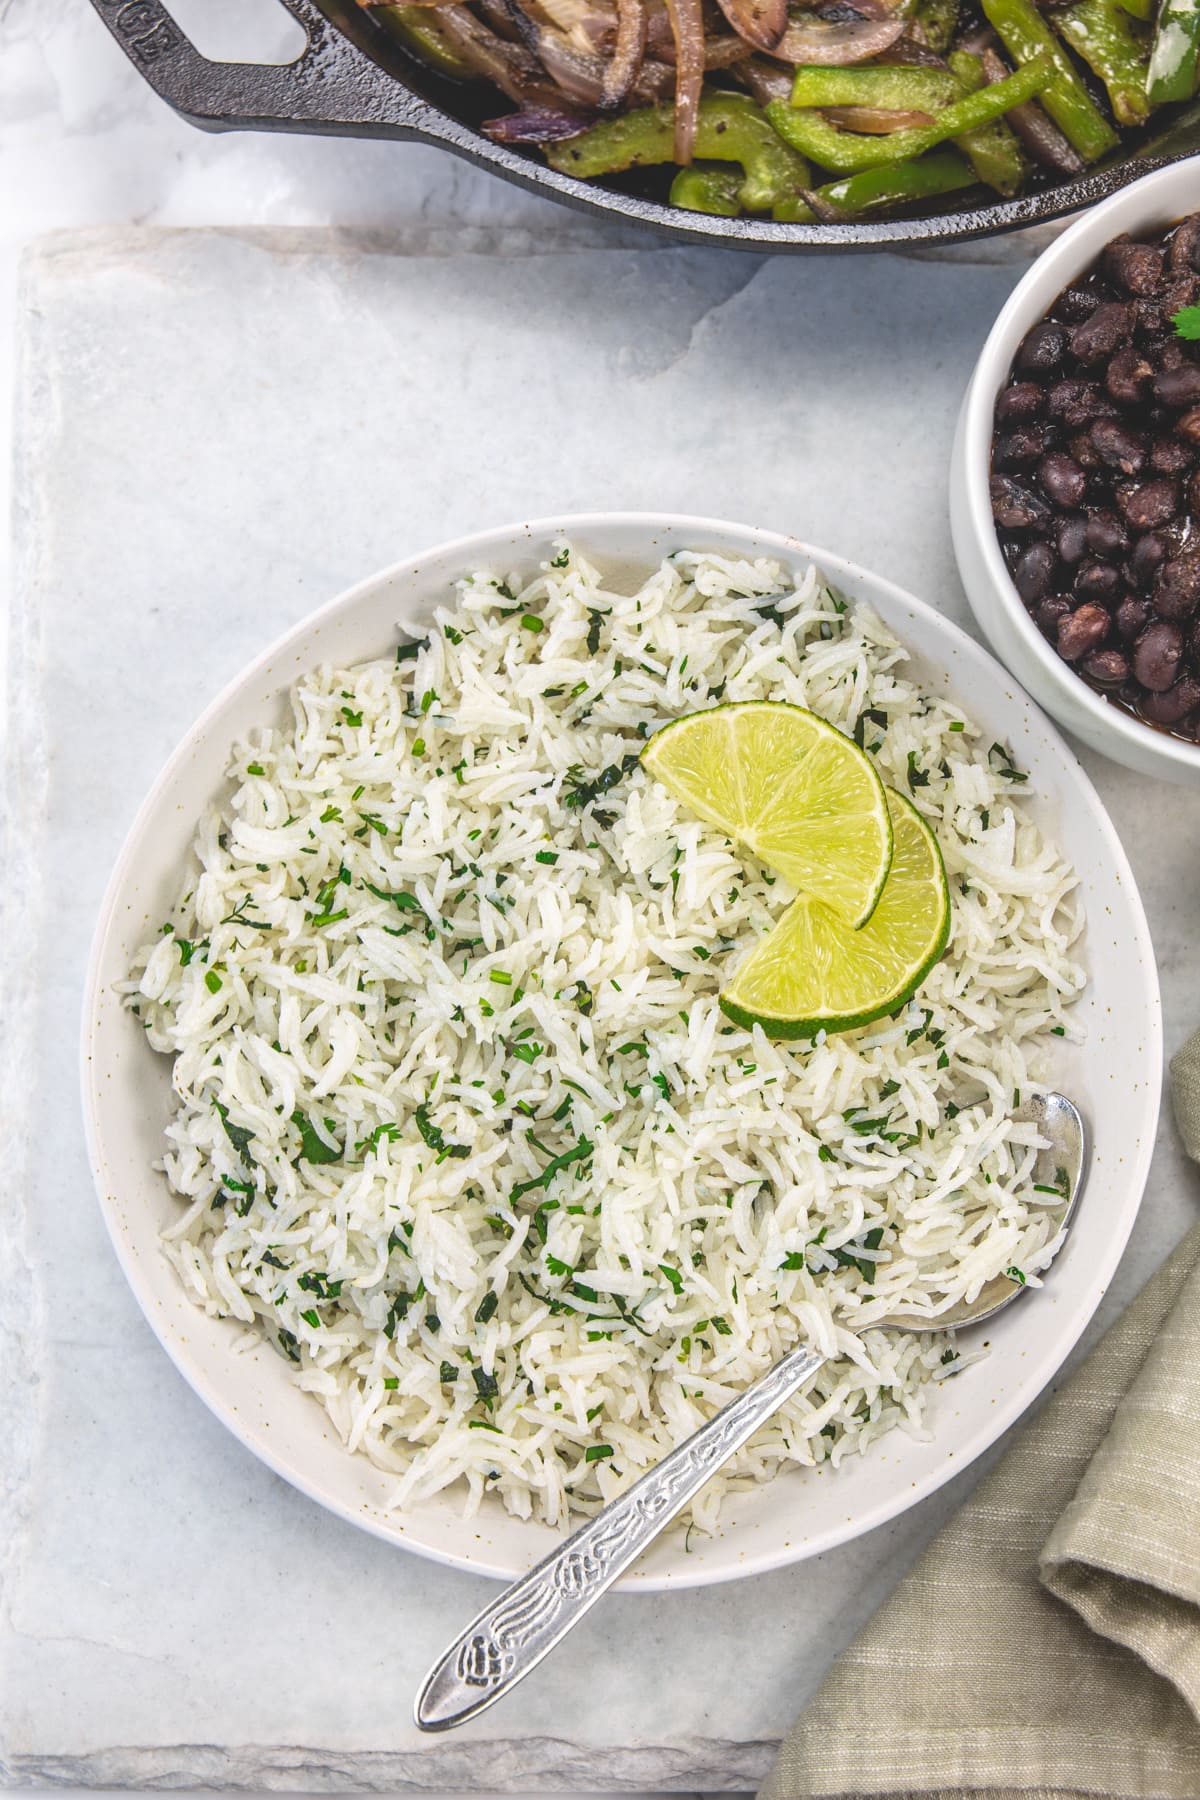 Chipotle cilantro lime rice in a bowl garnished with lime slices.